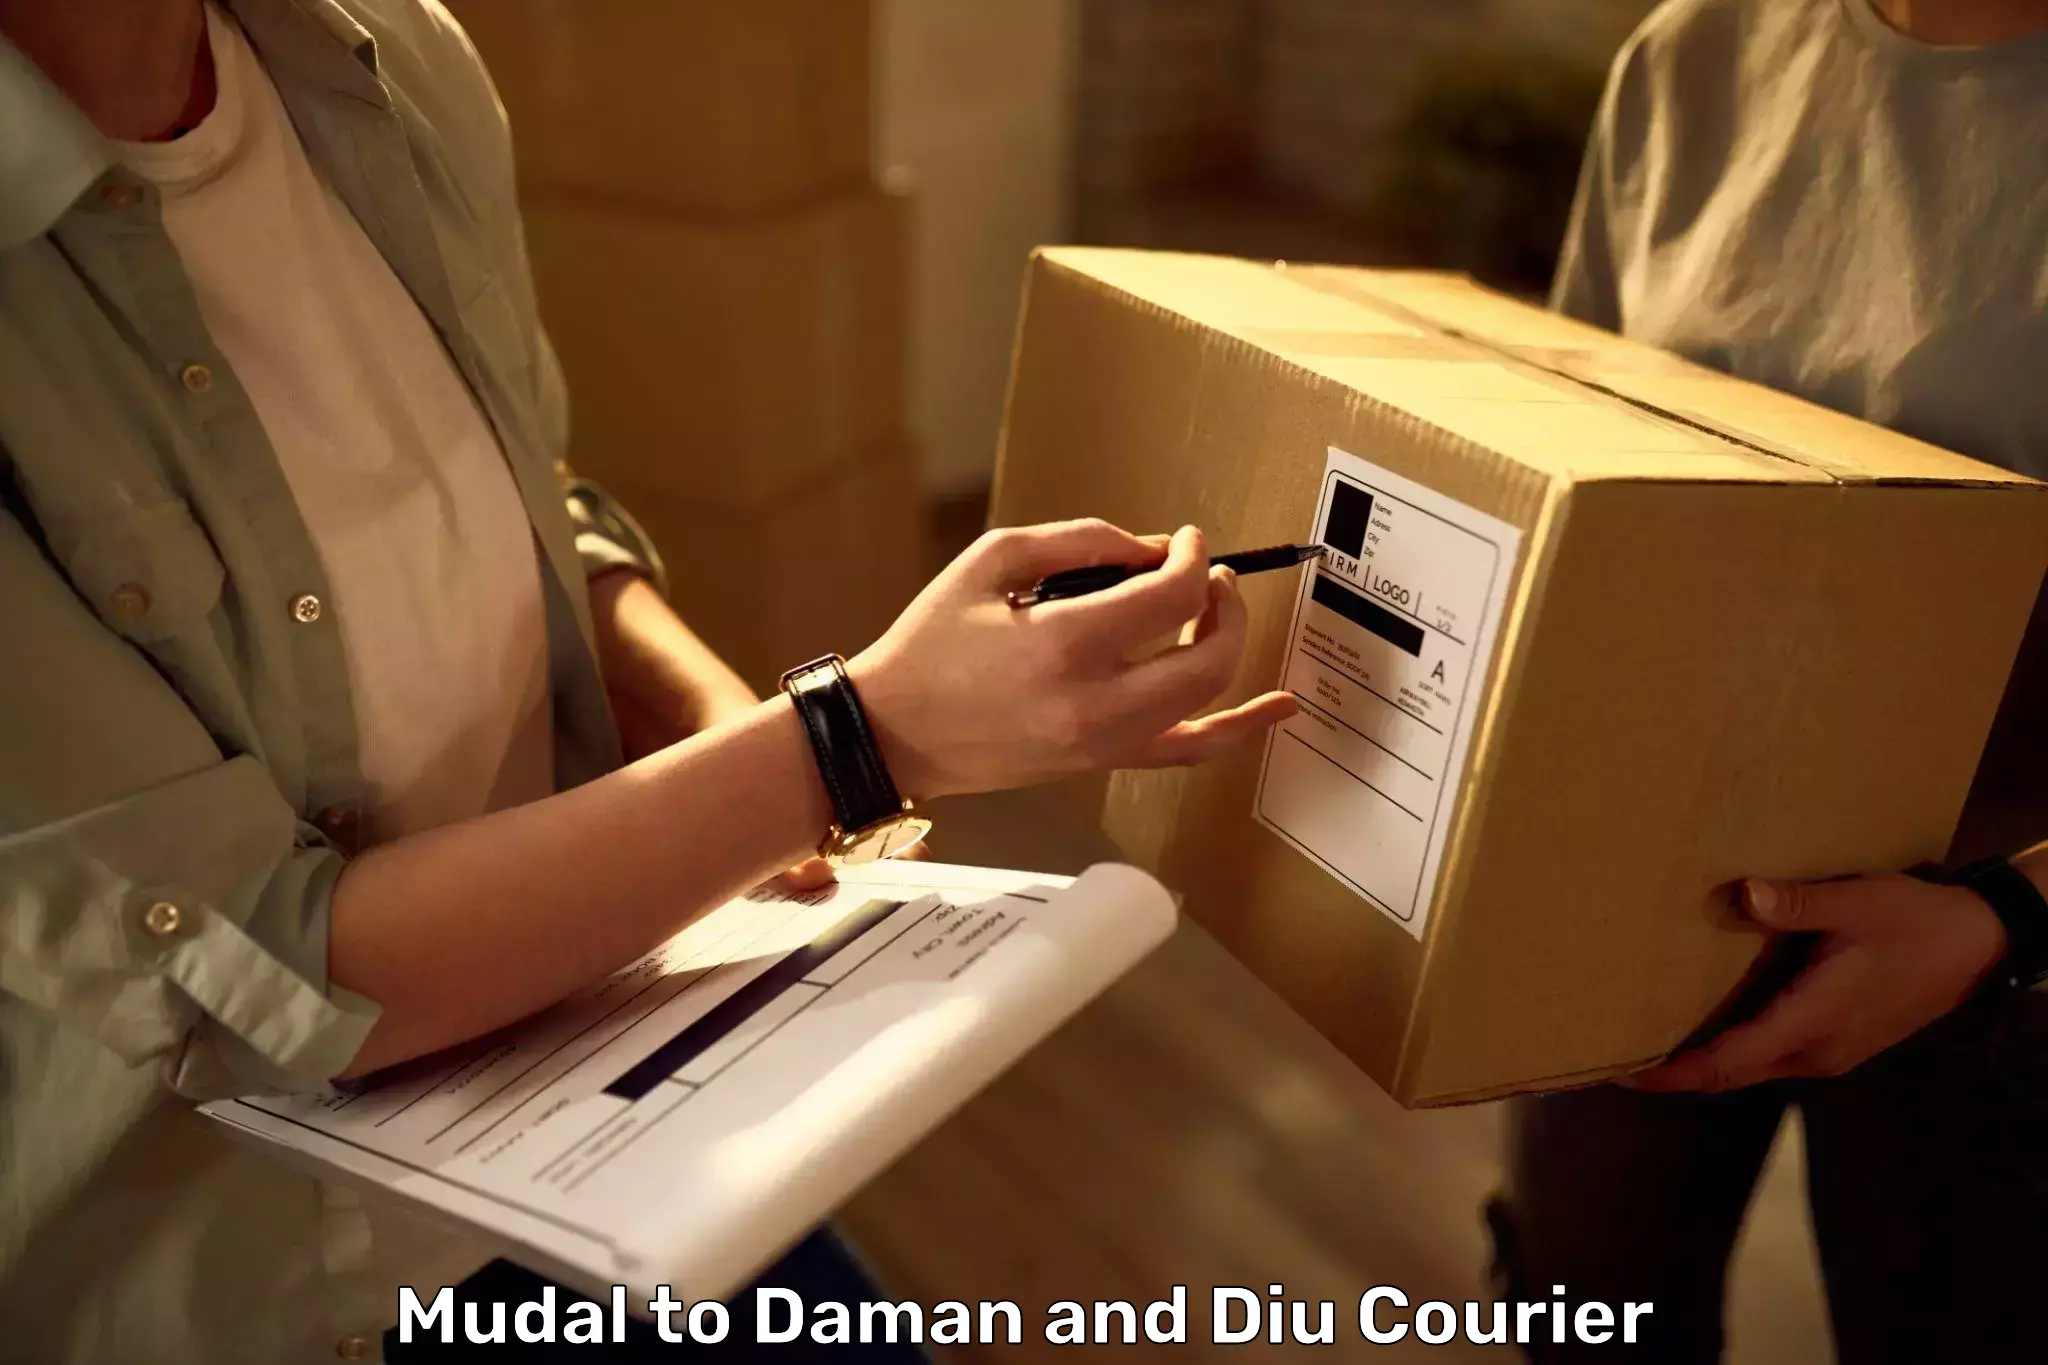 Luggage shipment specialists Mudal to Daman and Diu